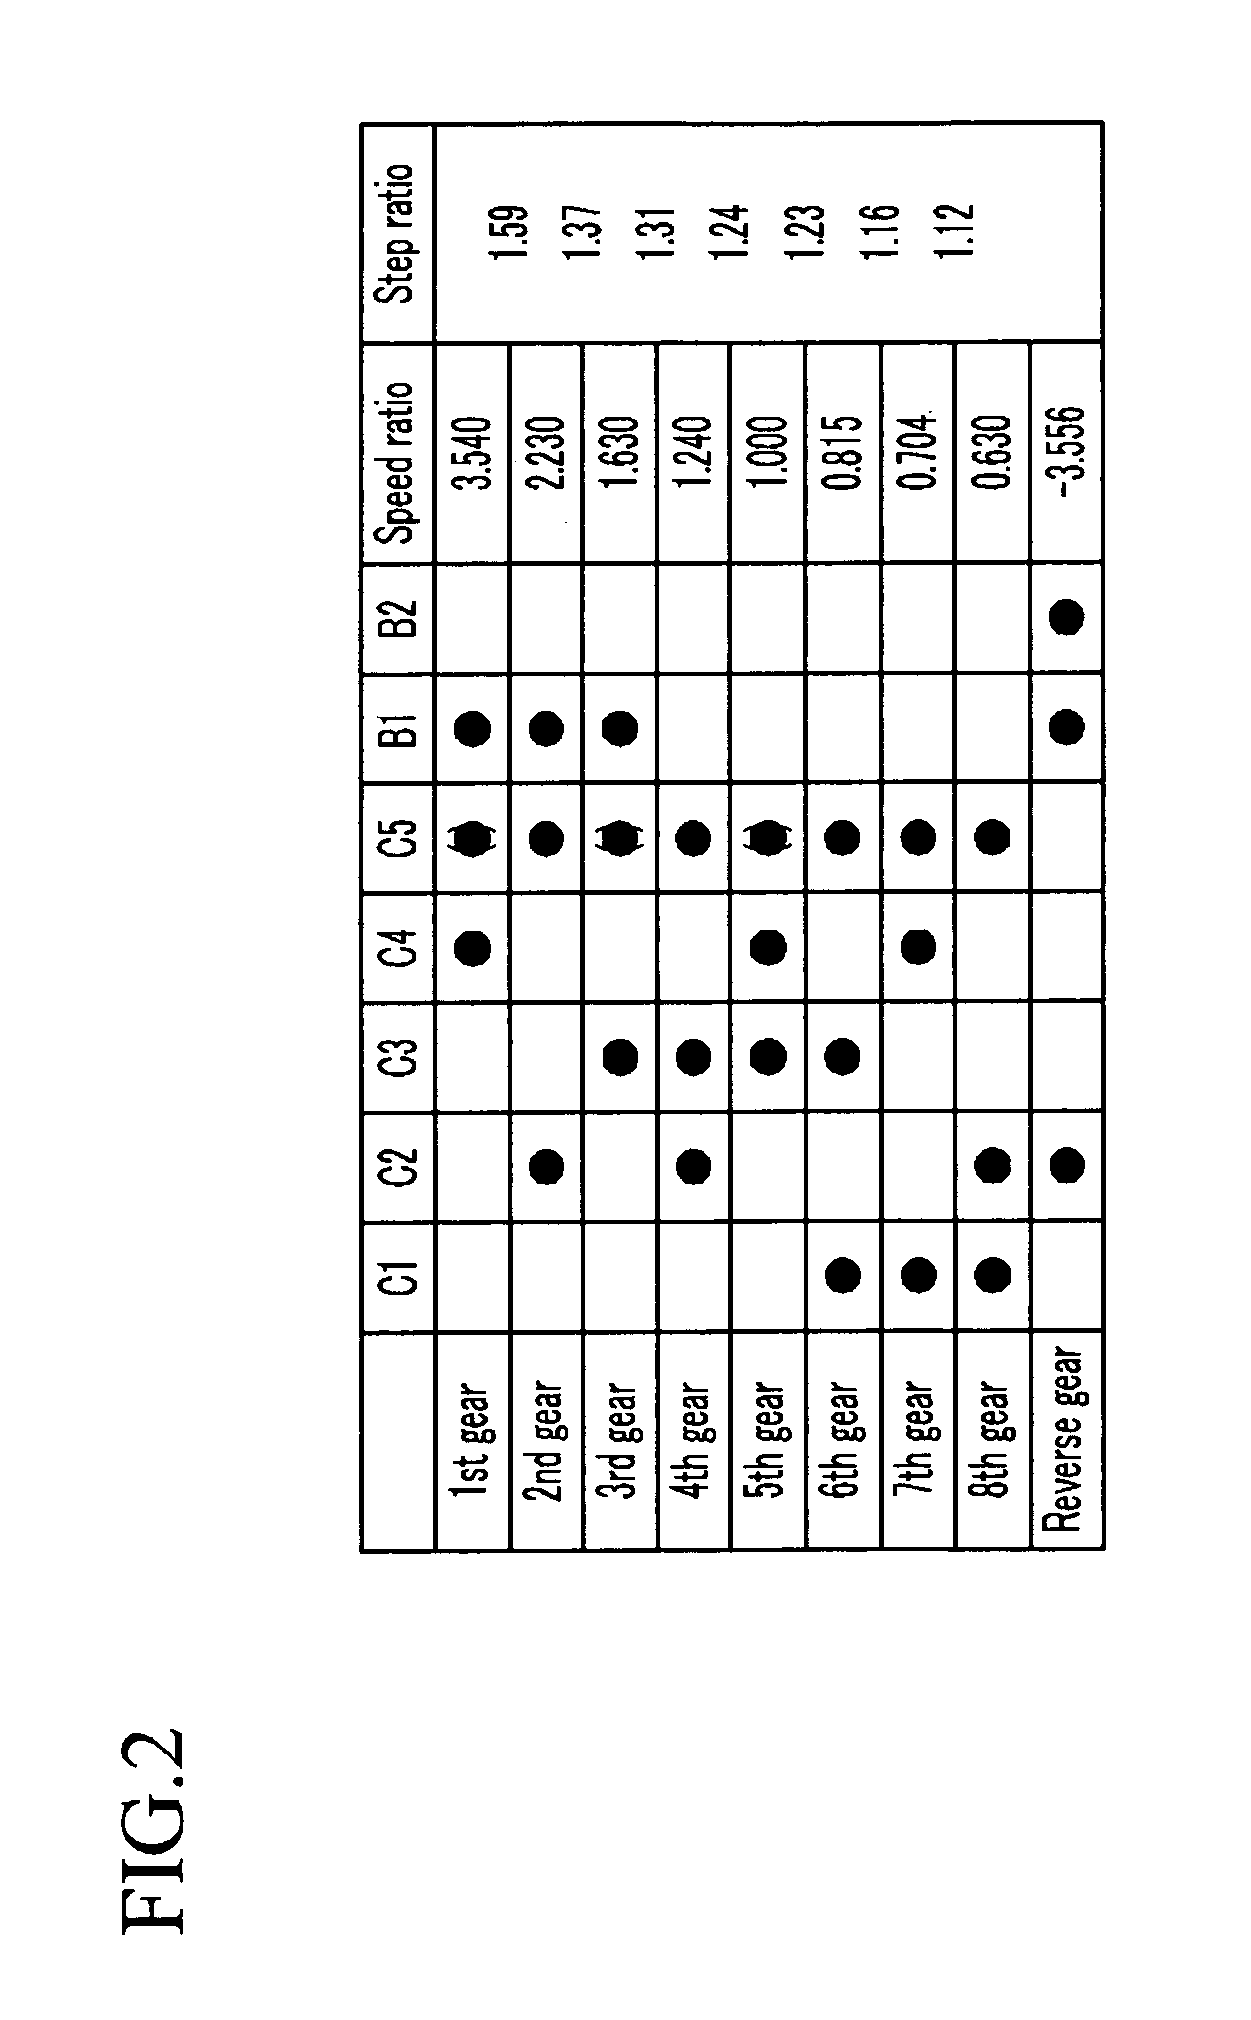 Multiple speed automatic transmission for a vehicle